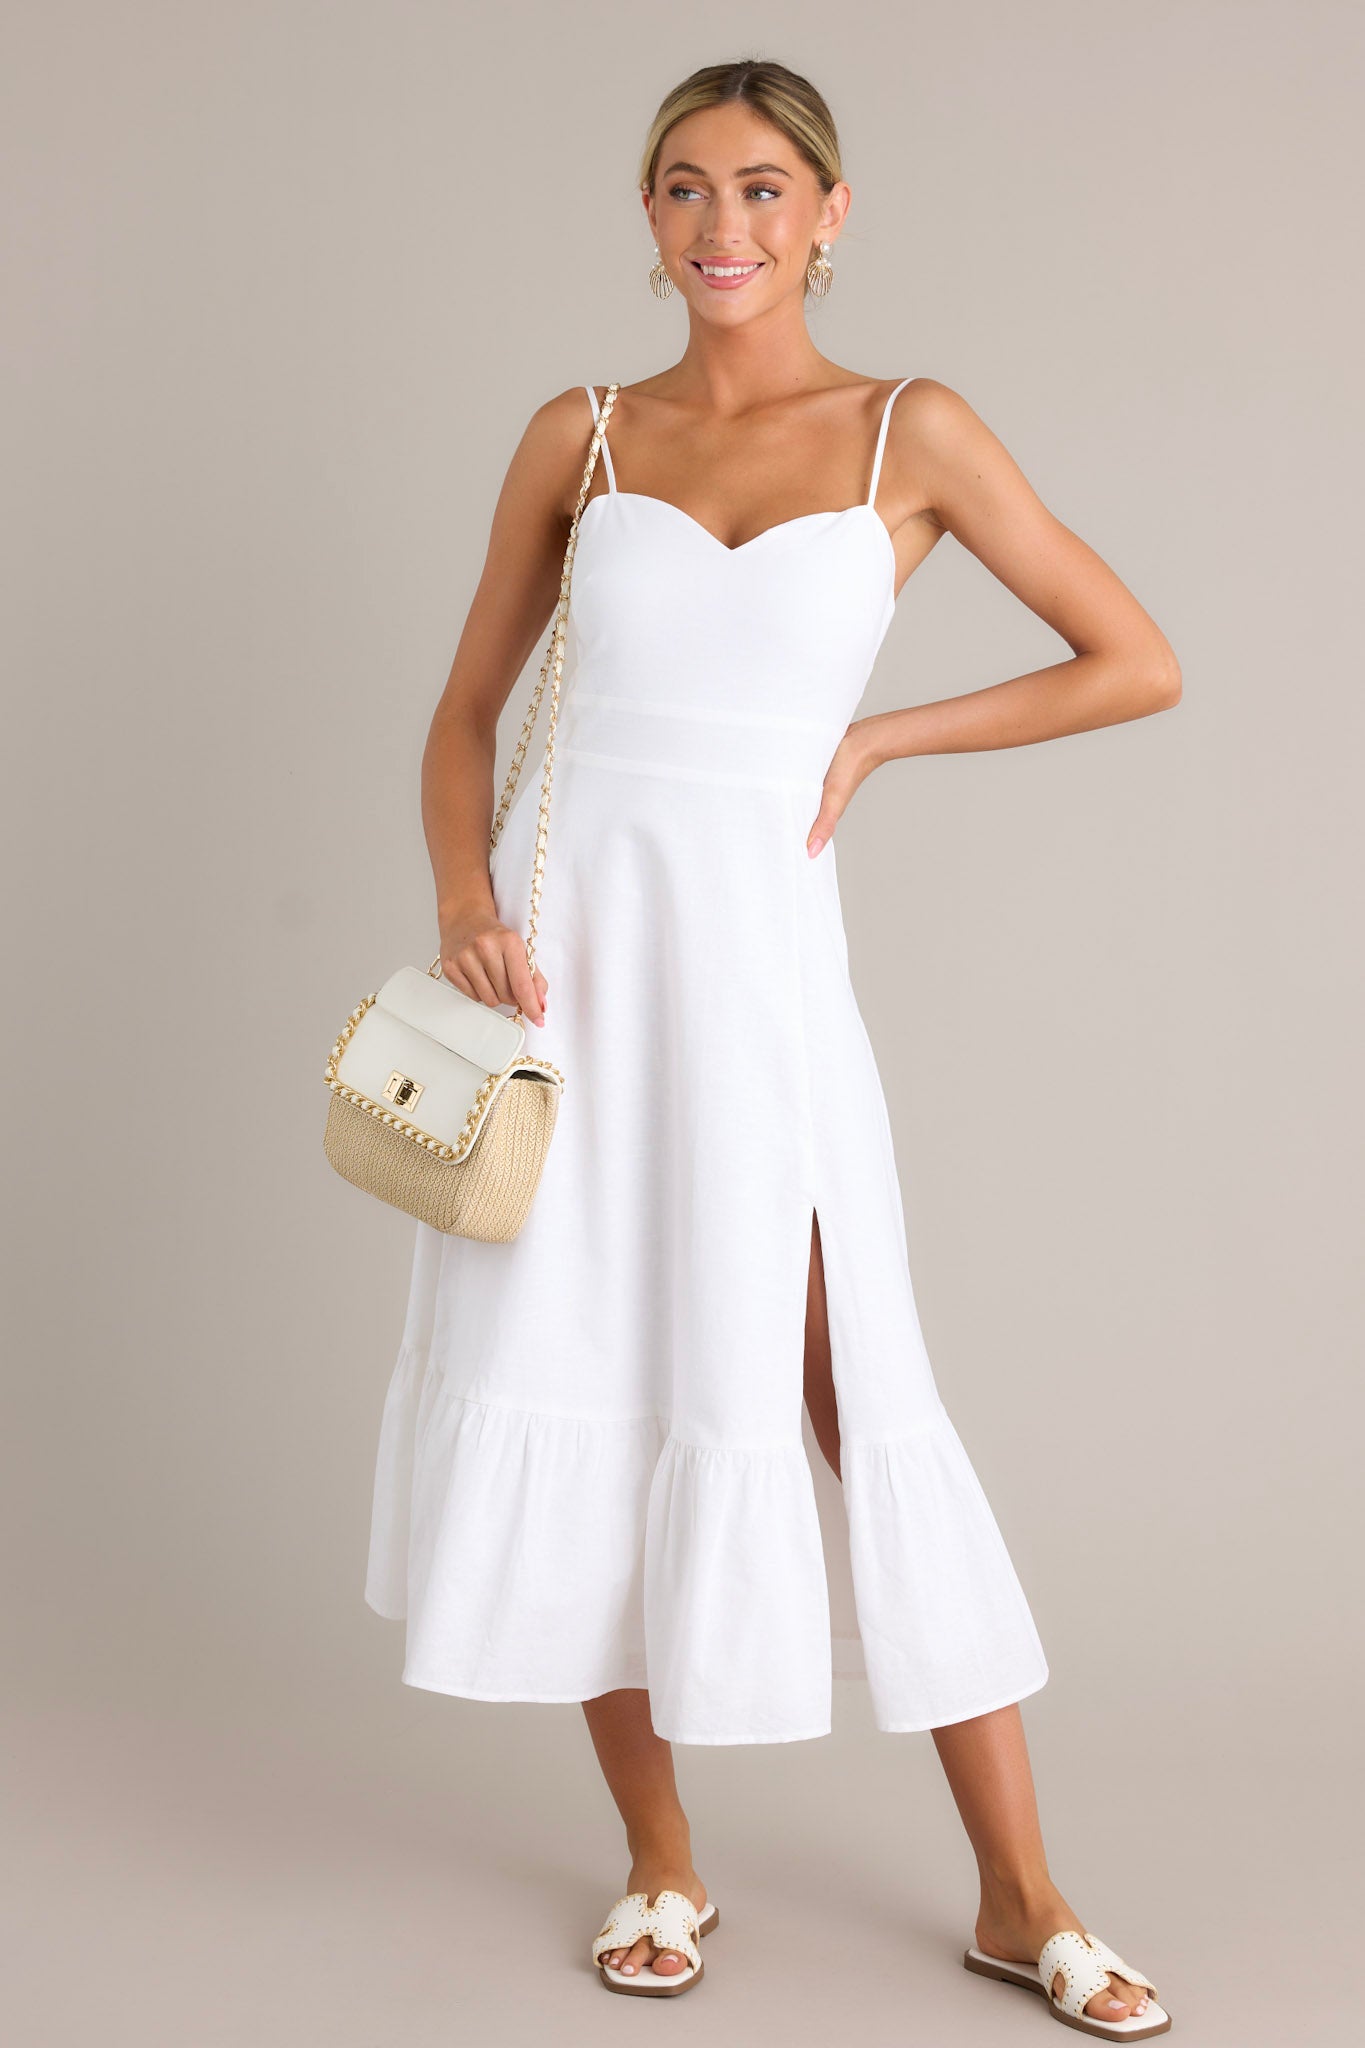 This white maxi dress features a sweetheart neckline, thin adjustable straps, a smocked back insert, a discrete zipper, a single tier, and a slit.